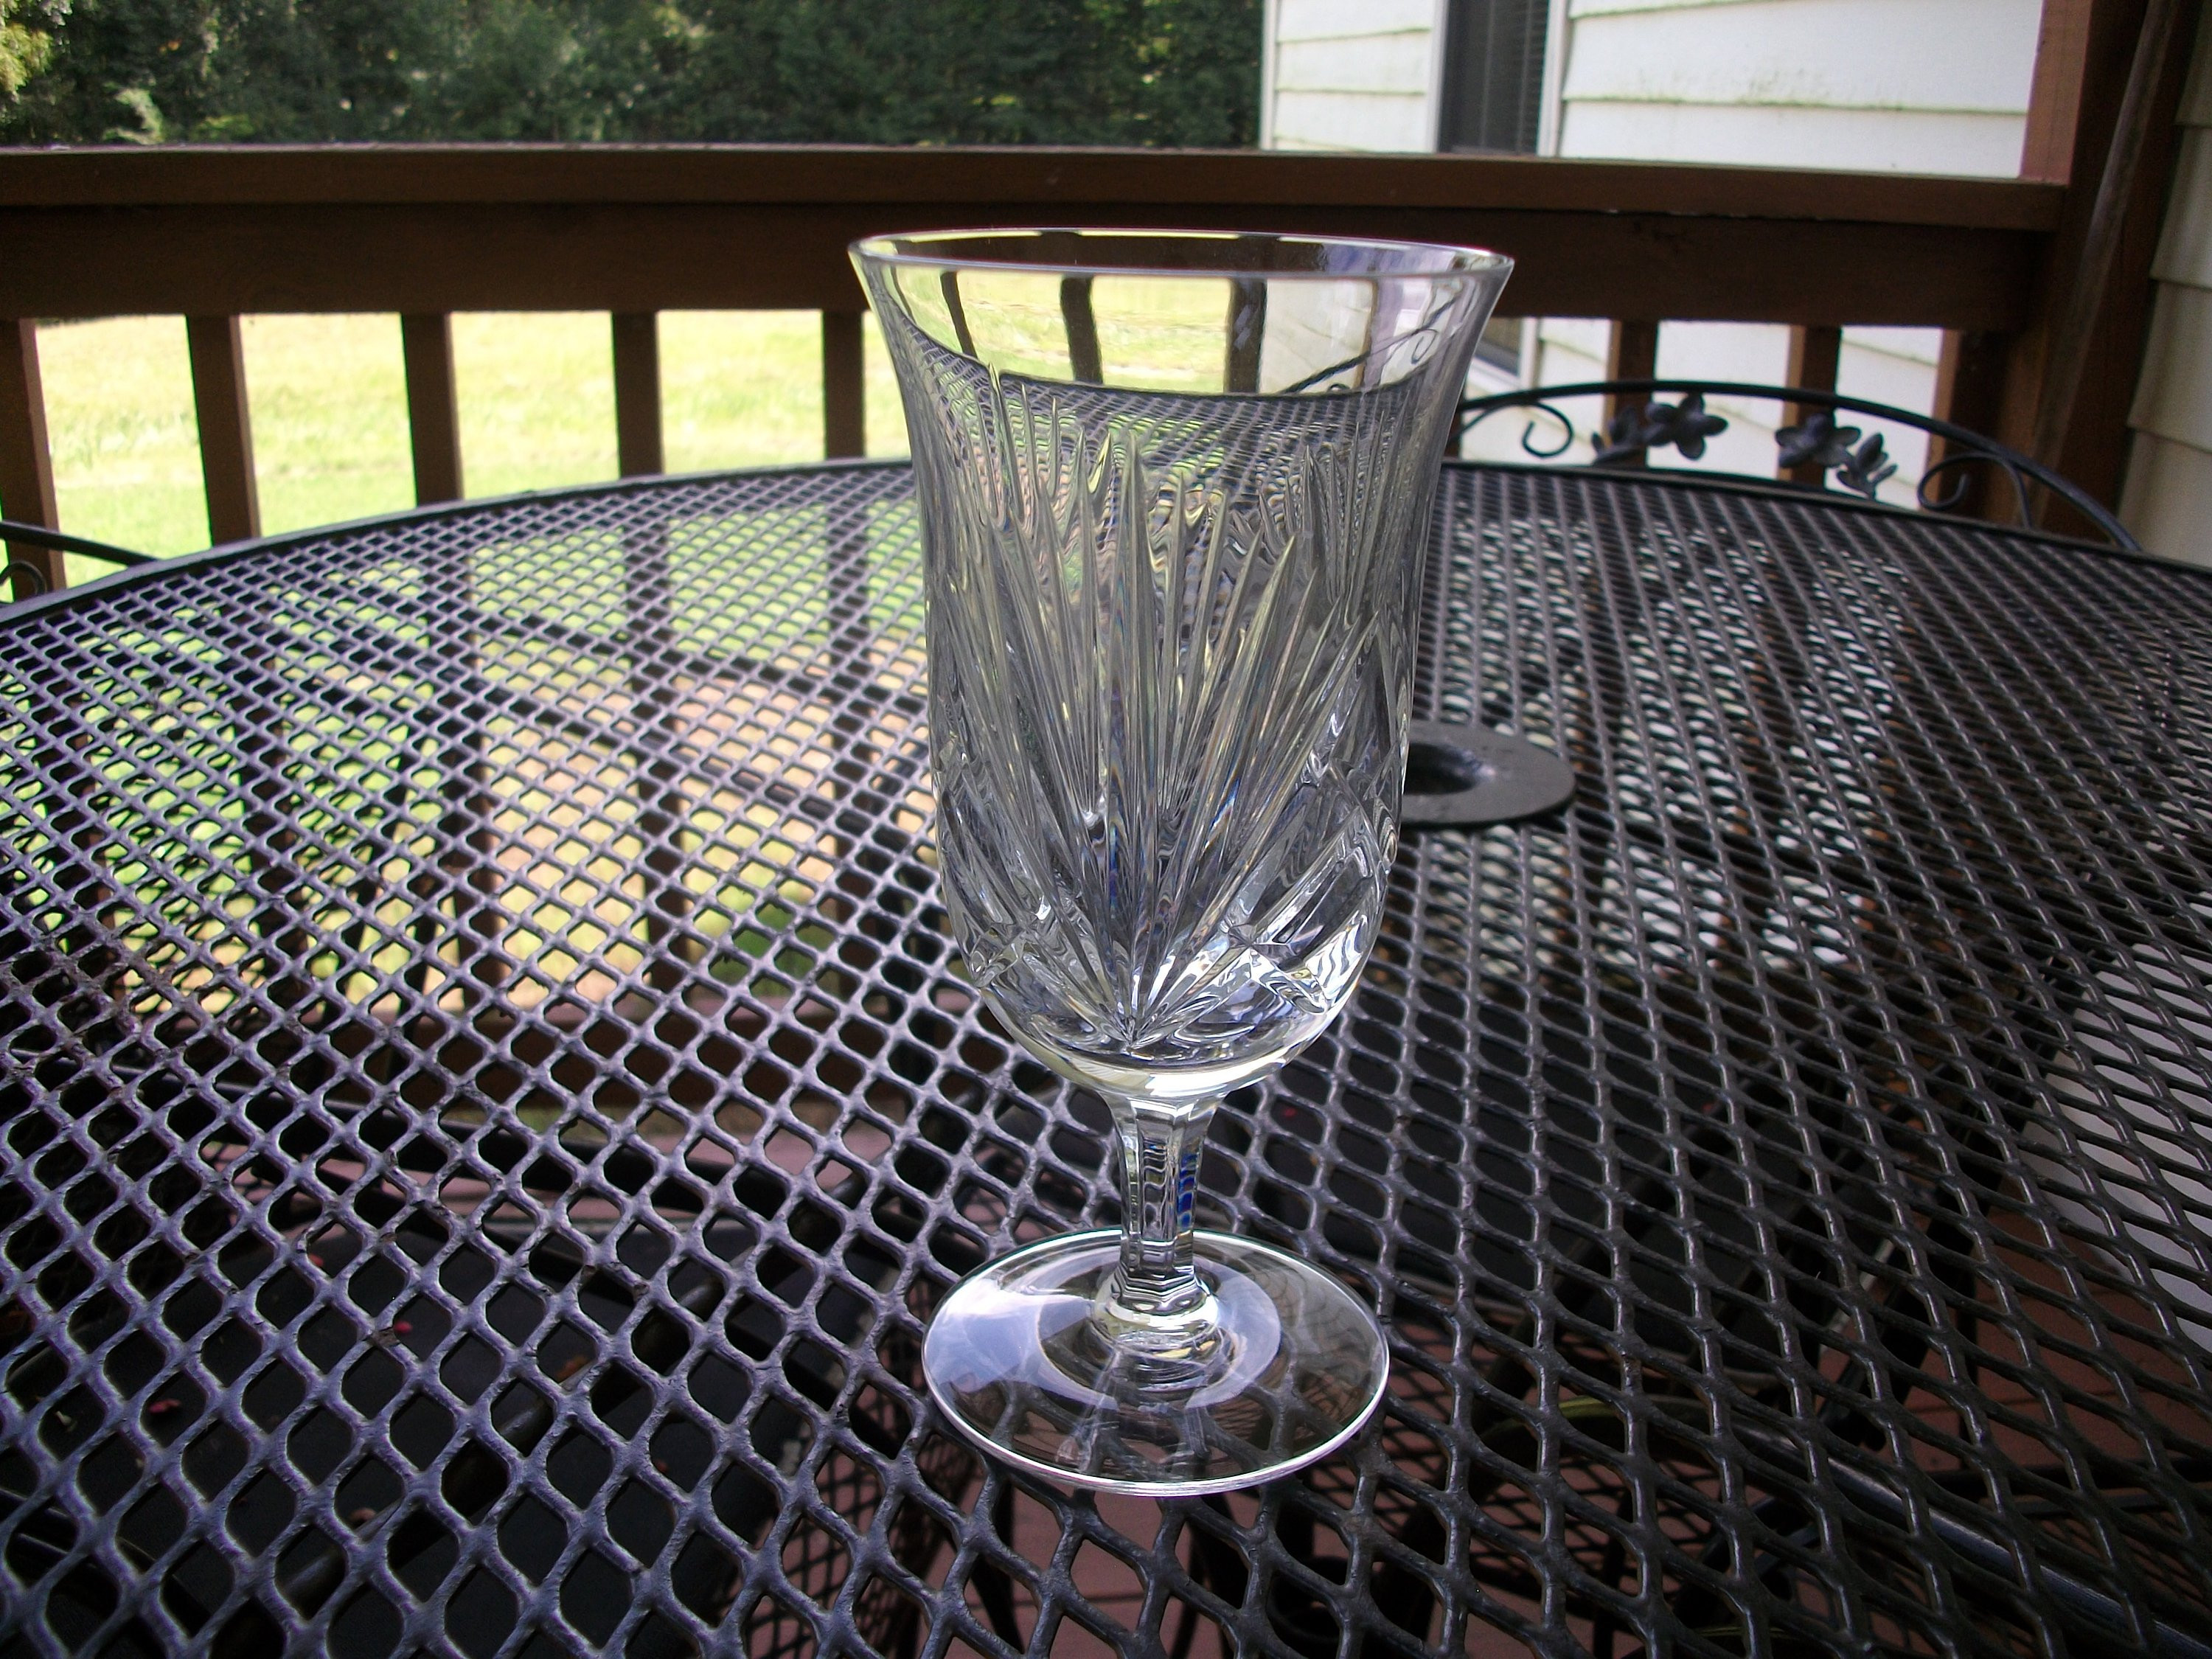 13 Fantastic Waterford Crystal Flower Vase 2024 free download waterford crystal flower vase of gorham cherrywood ice tea glass goblet etsy within dc29fc294c28ezoom